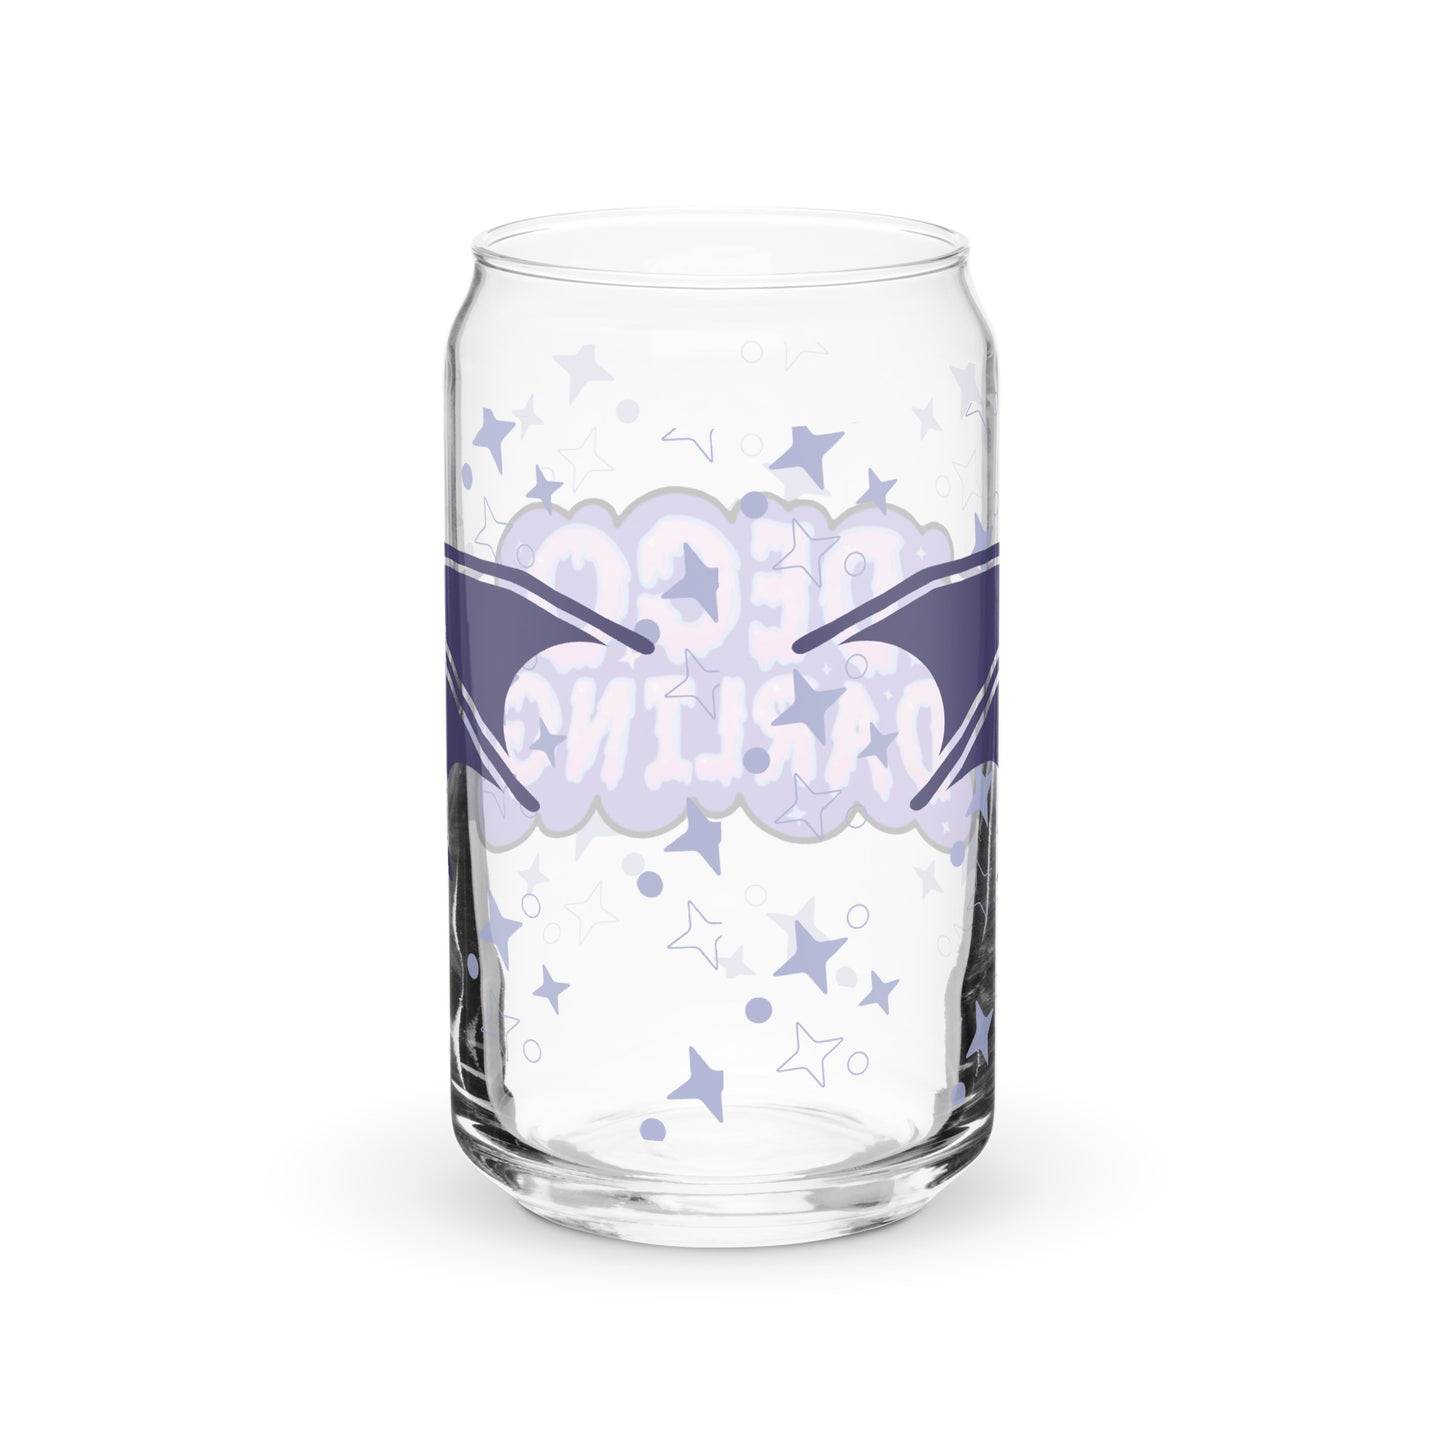 Deco Darling Can-shaped glass